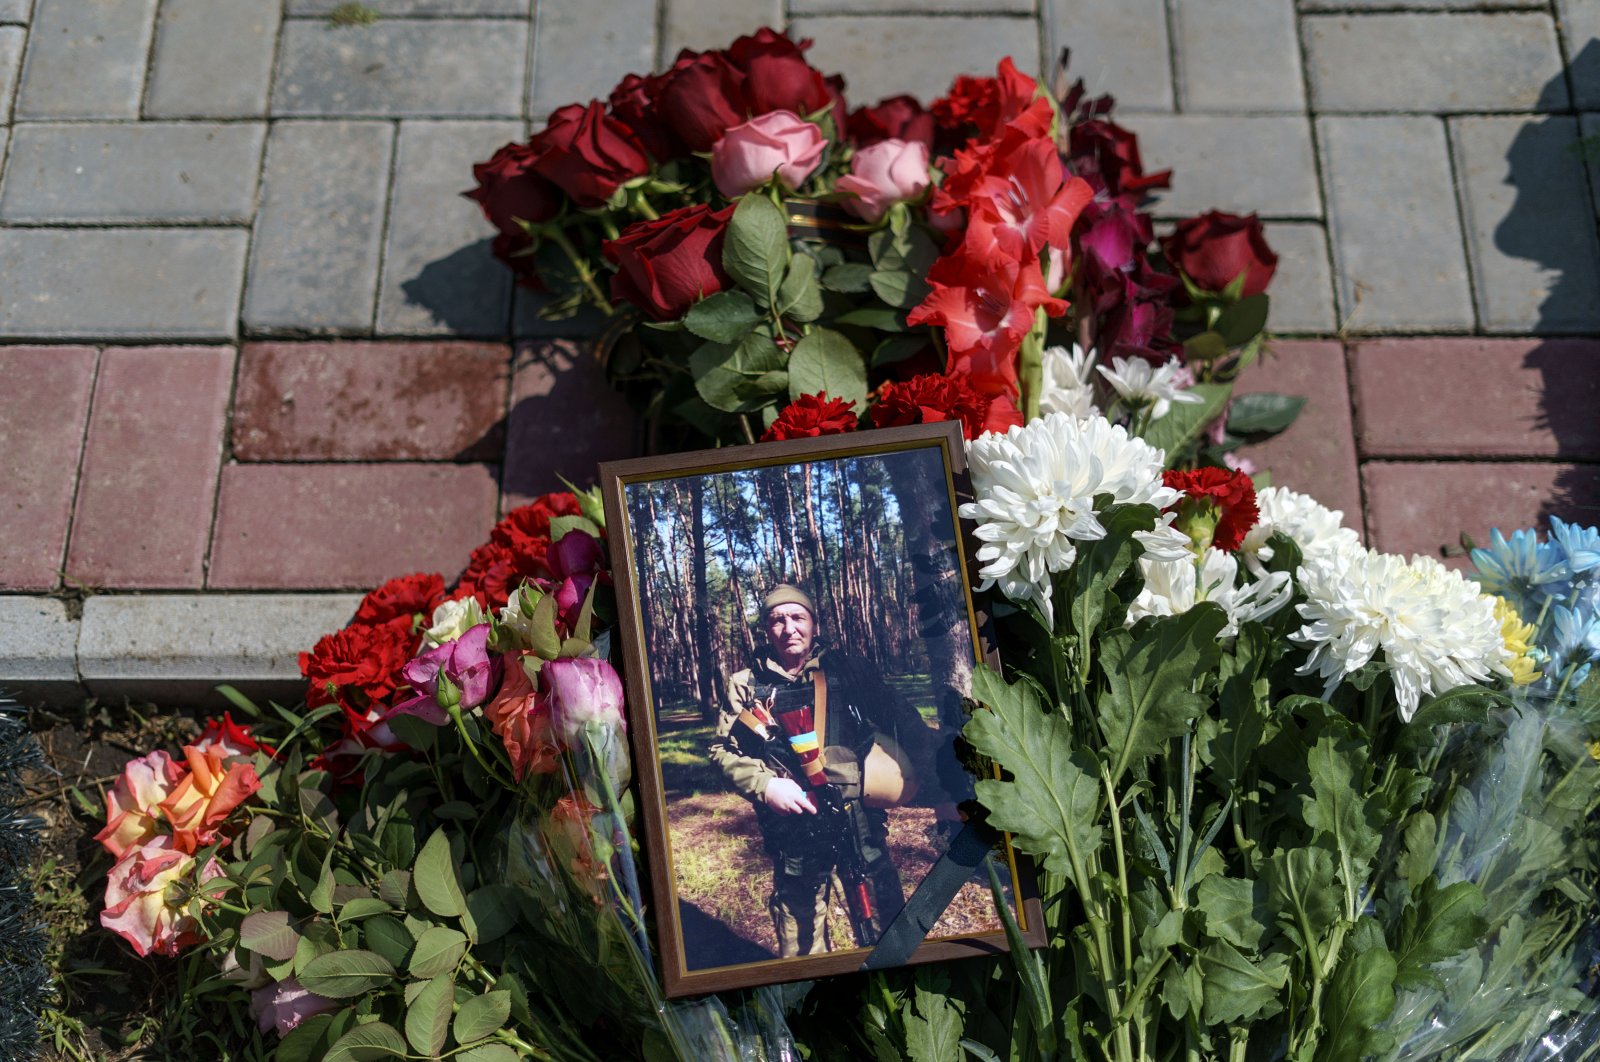 Flowers surround a photo of Oleh Panchenko next to his grave during his burial service in Pokrovsk, Donetsk region, eastern Ukraine, Thursday, Aug. 4, 2022. Panchenko, 48, a Ukrainian soldier, was killed in battle with Russian forces July 27 in the Donetsk region. (AP Photo/David Goldman)